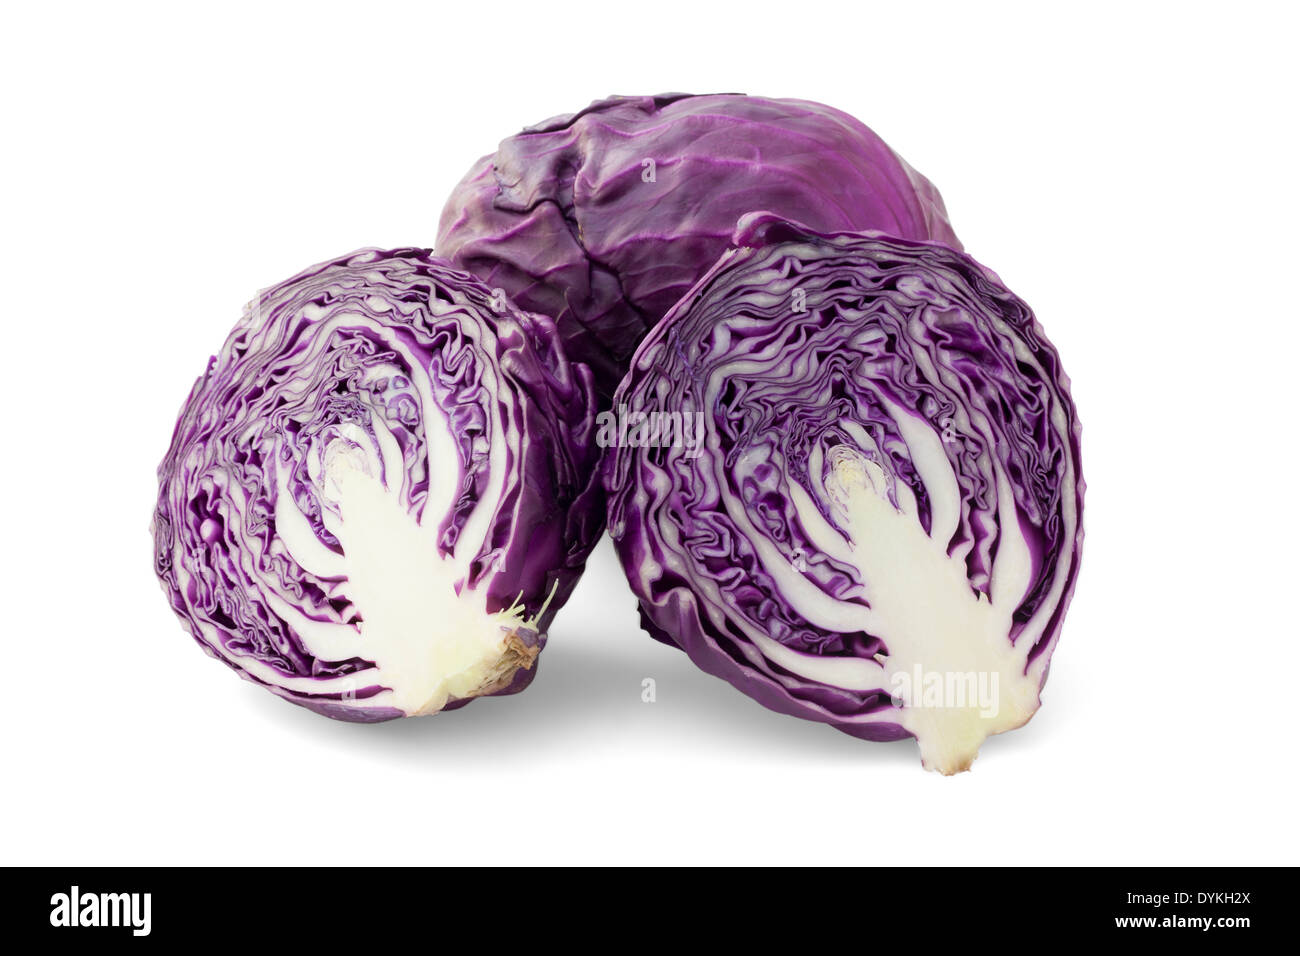 Red cabbage or violet cabbage Stock Photo